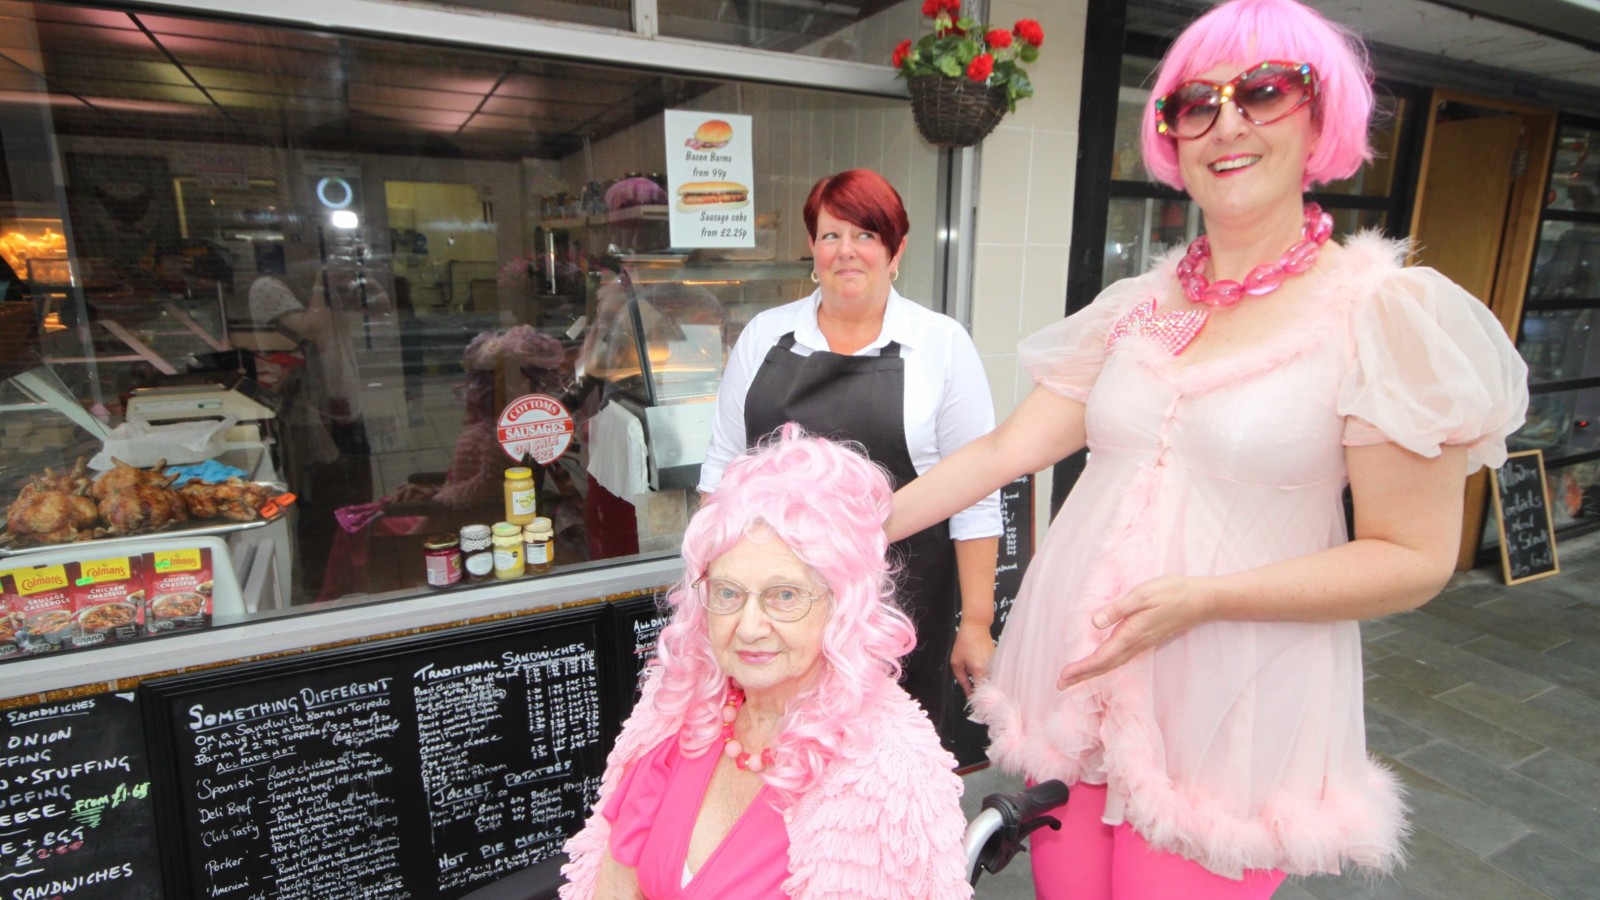 Two people in pink wigs are in front of a takeaway window. One person sitting in a wheelchair wears a bright pink dress and soft pink cardigan. The other wears a pink fluffy dress, bright pink tights. and sunglasses. They gesture to point your attention to the person sitting, smiling widely. Behind the two people another stands smiling and looking at the two people in pink.